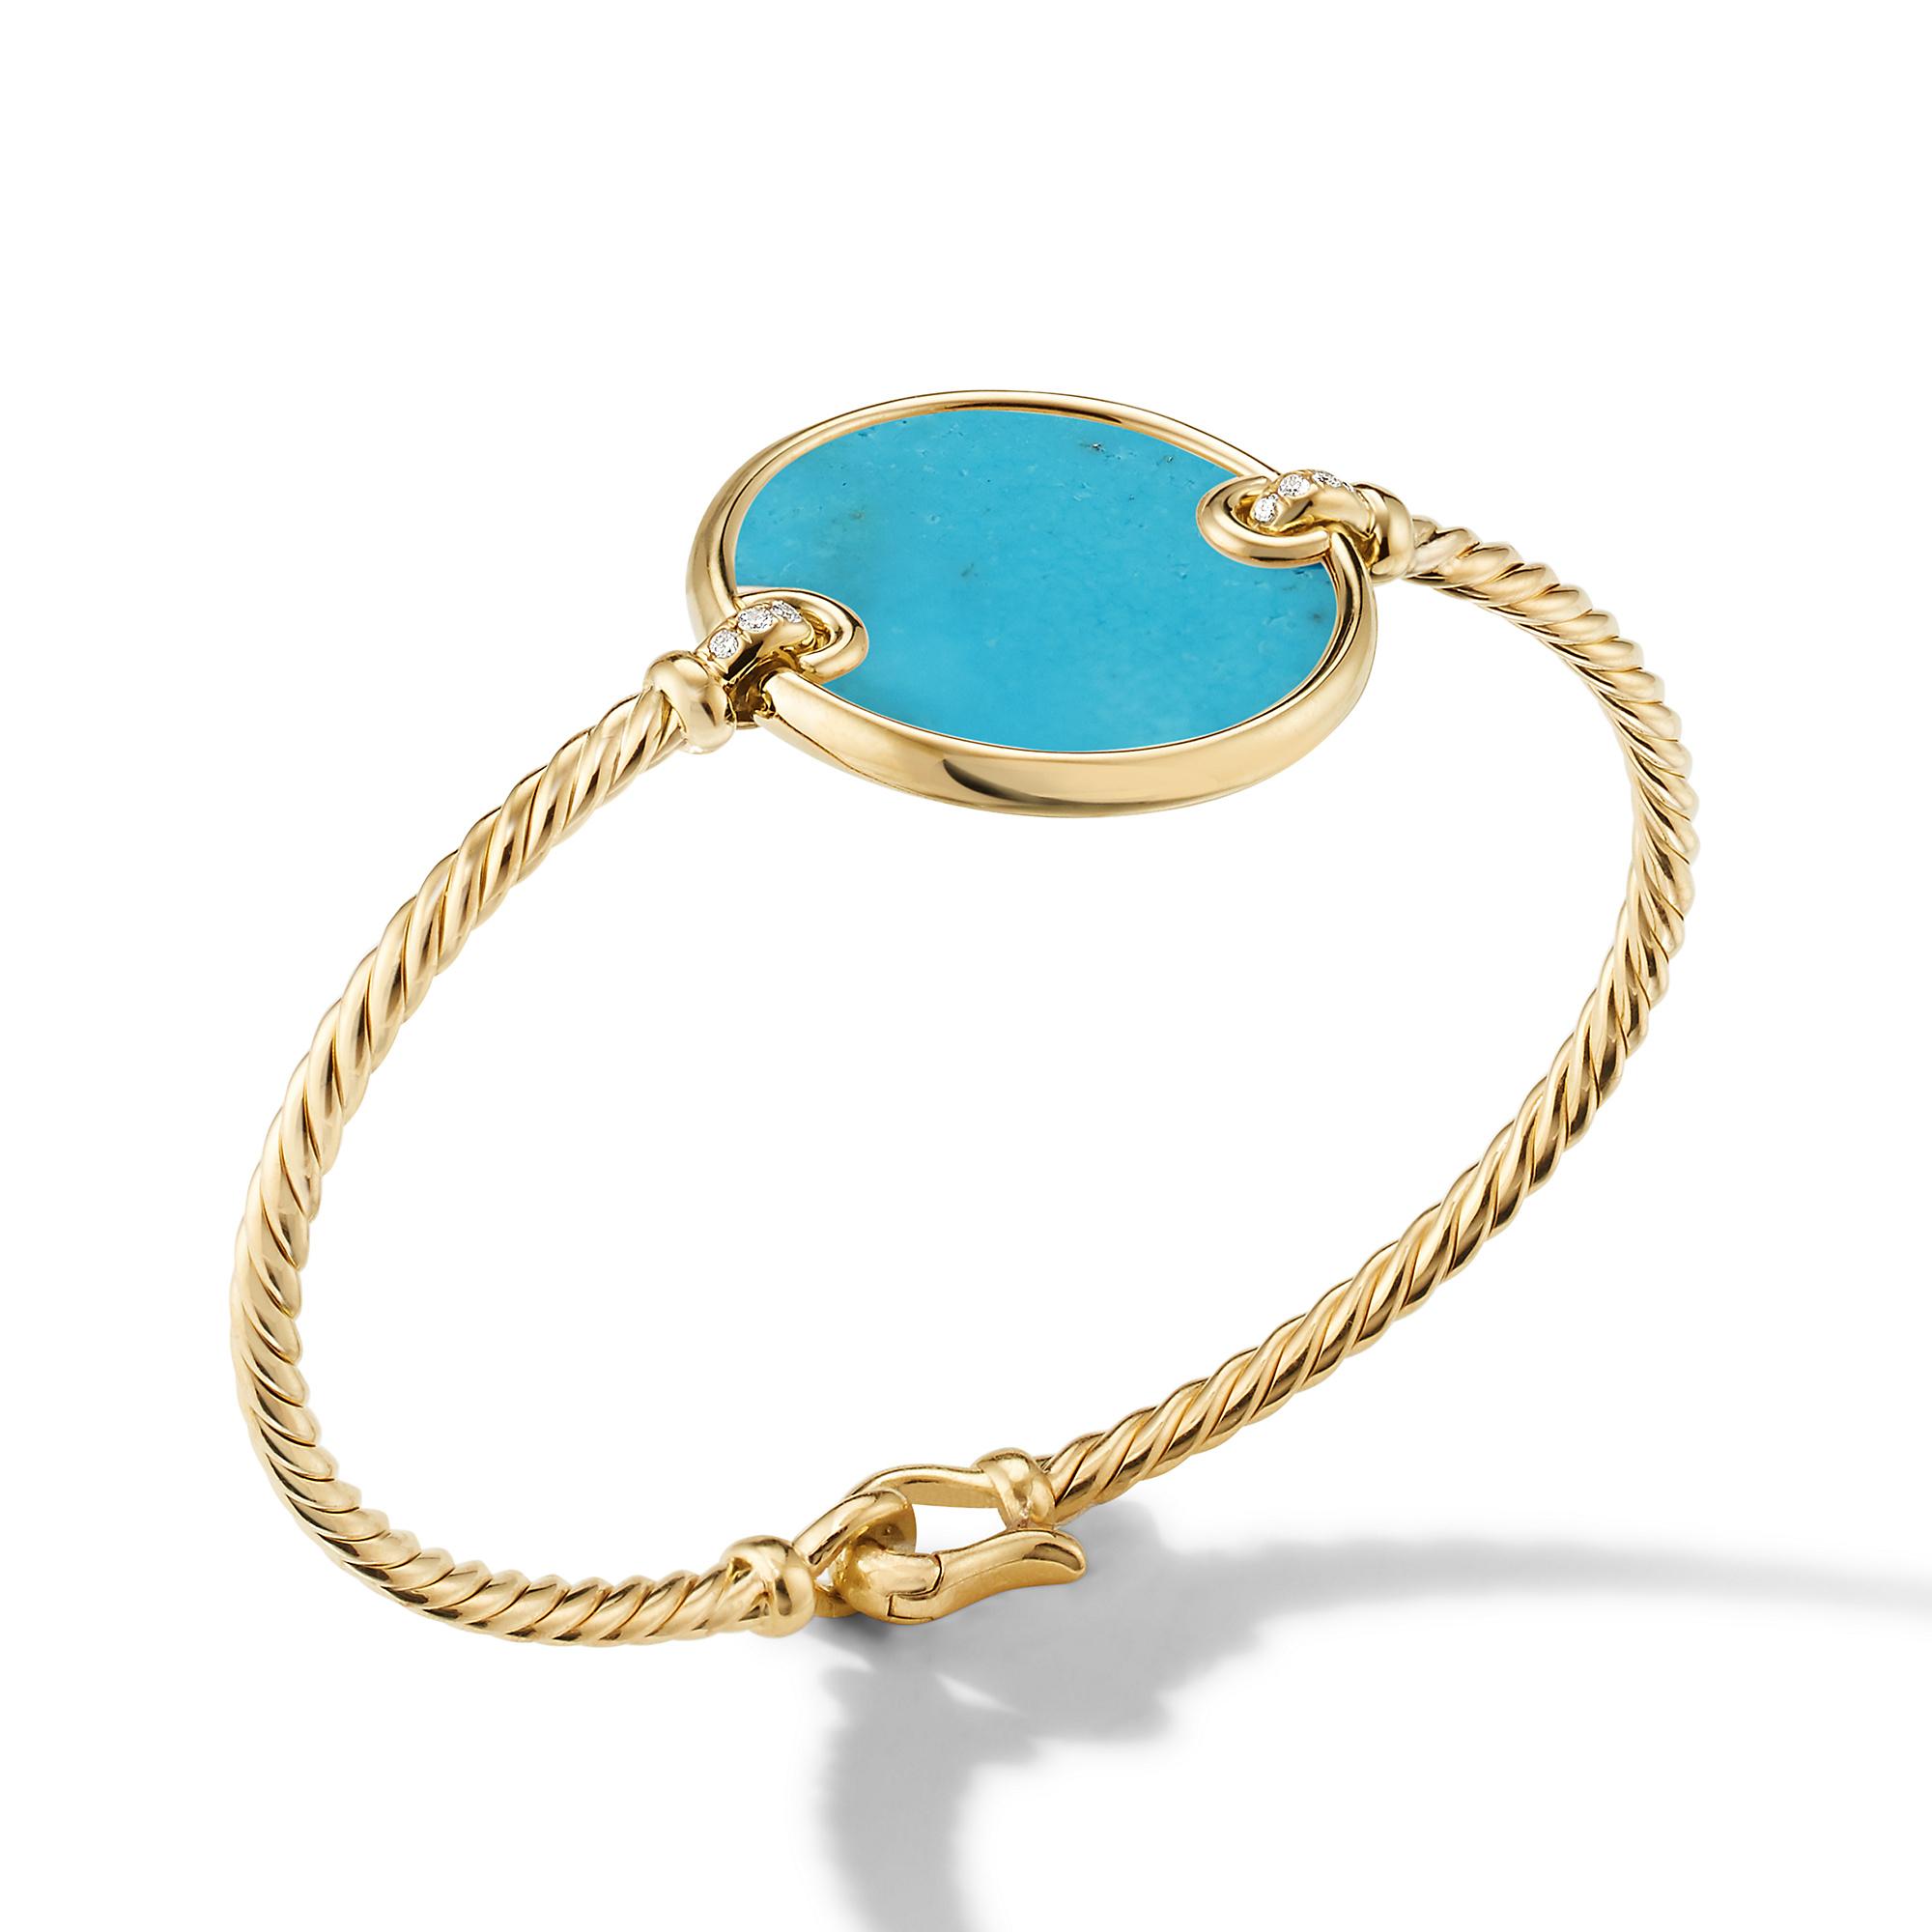 David Yurman DY Elements Bracelet in 18K Yellow Gold with Turquoise and Pave Diamonds